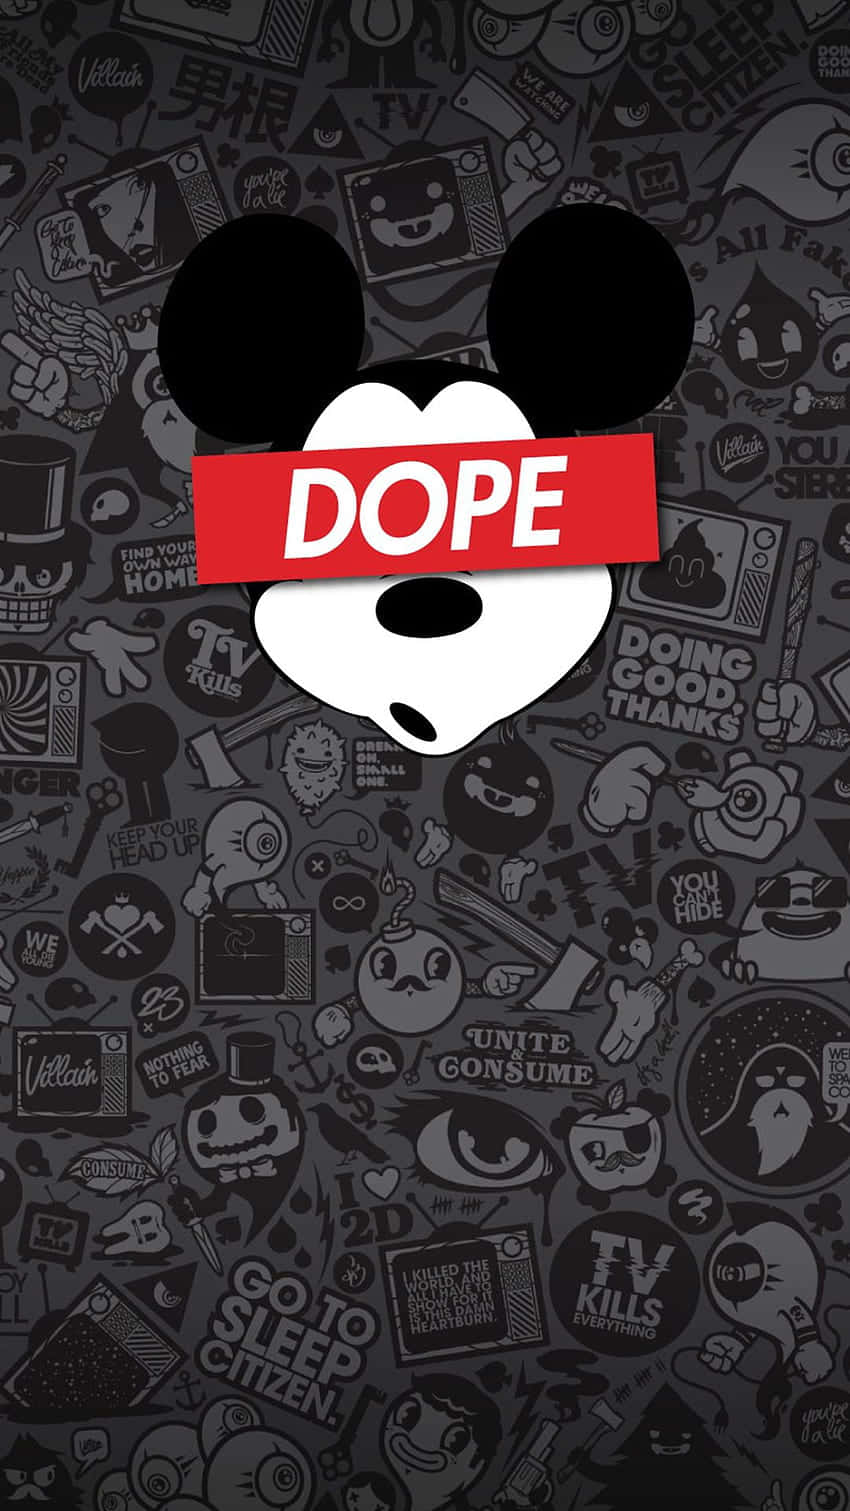 "Unlock your Disney magic with the Black Mickey Mouse Phone!" Wallpaper